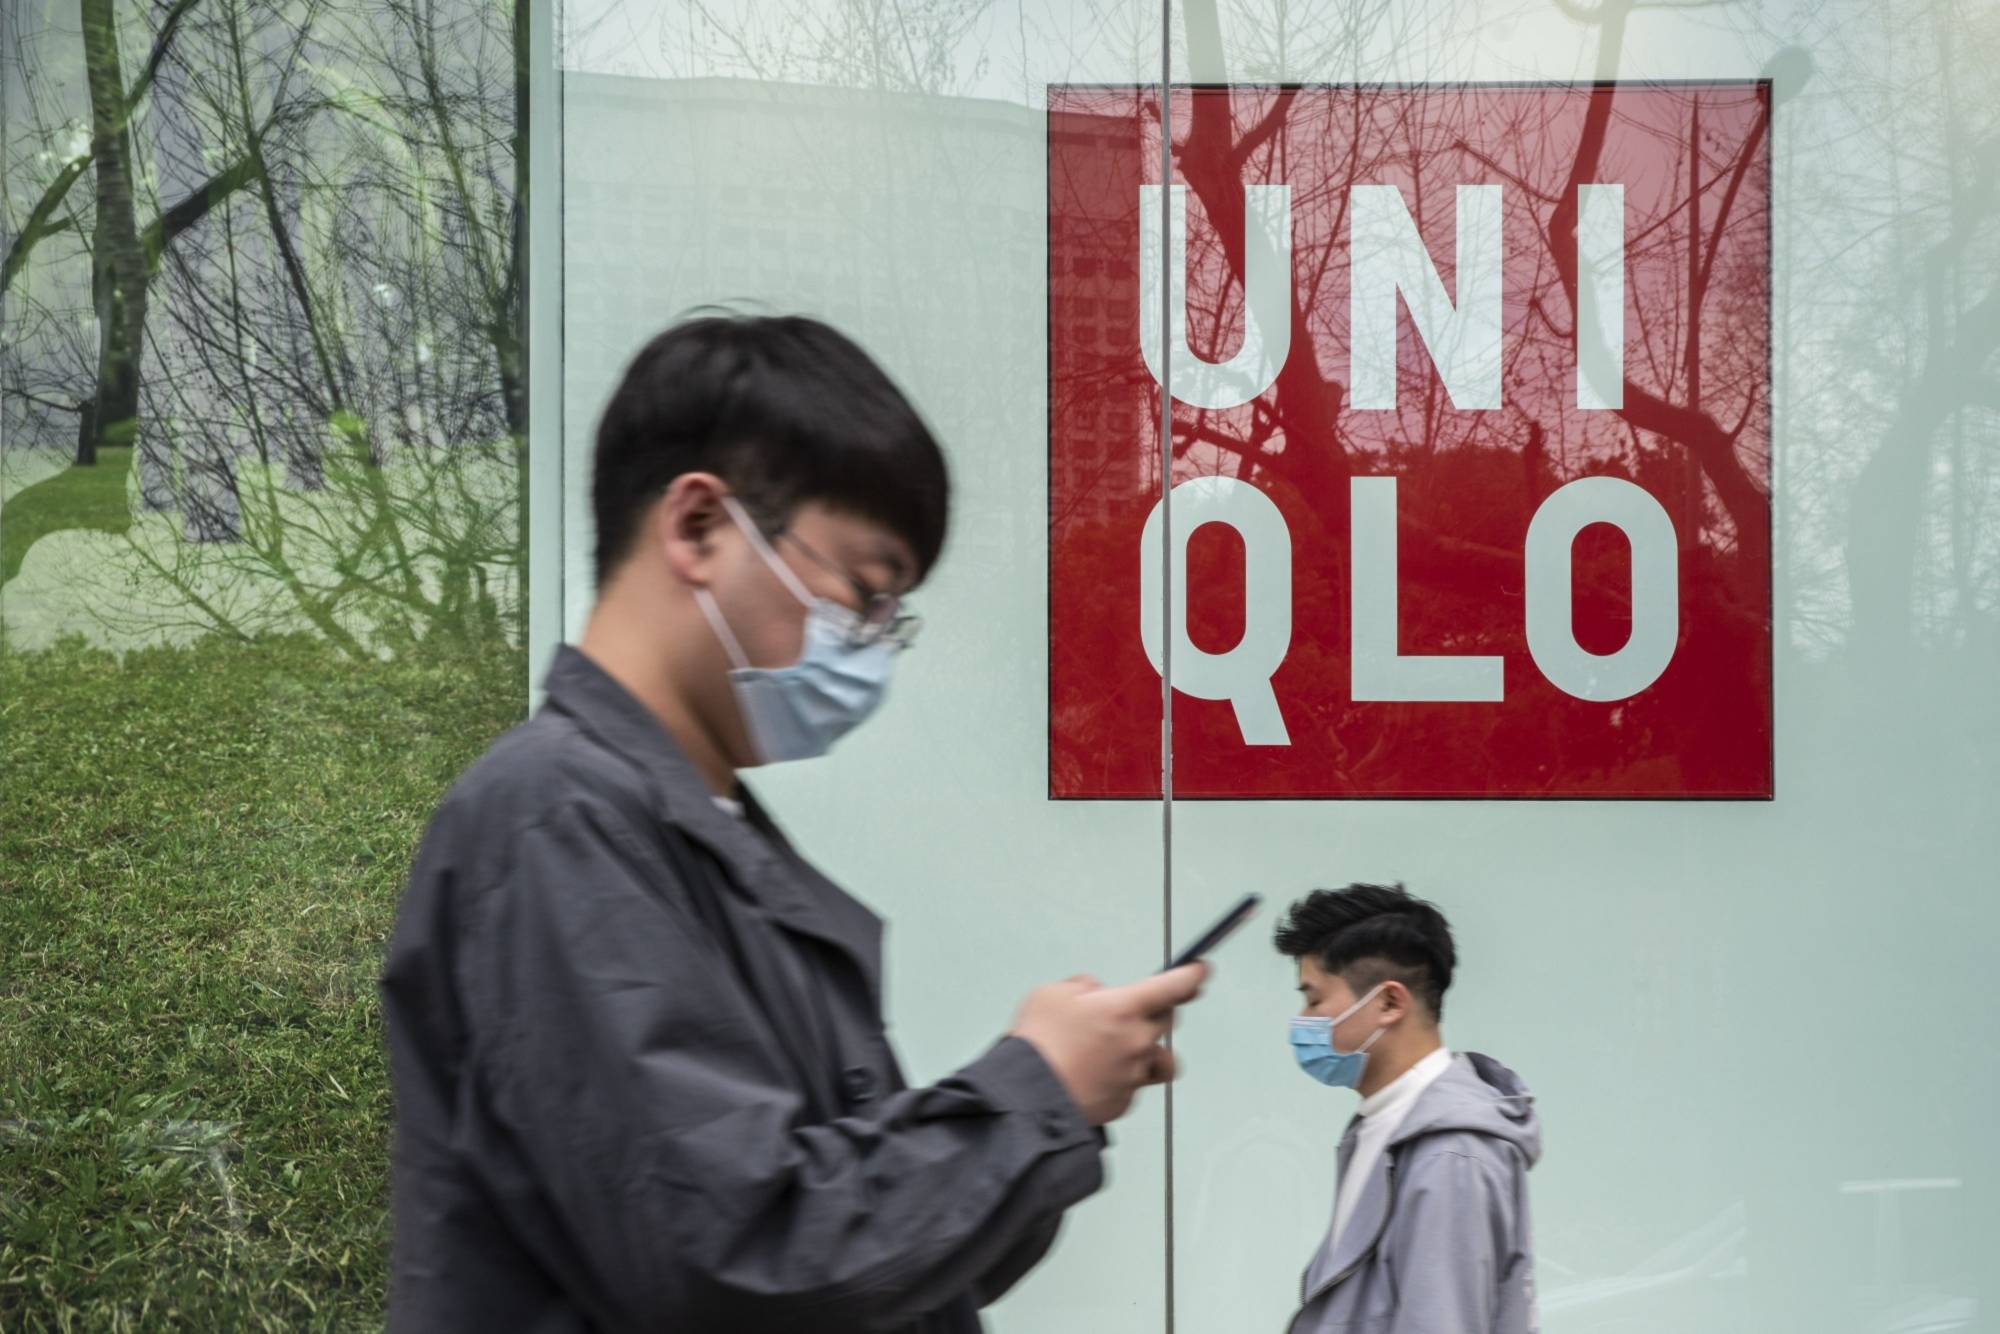 Pedestrians walk past a Uniqlo store, operated by Fast Retailing Co., in Shanghai in March. The U.S. customs agency blocked a shipment of Uniqlo shirts in January as the company failed to provide enough information to establish the items were not produced in part by forced labor in China’s Xinjiang region. | BLOOMBERG